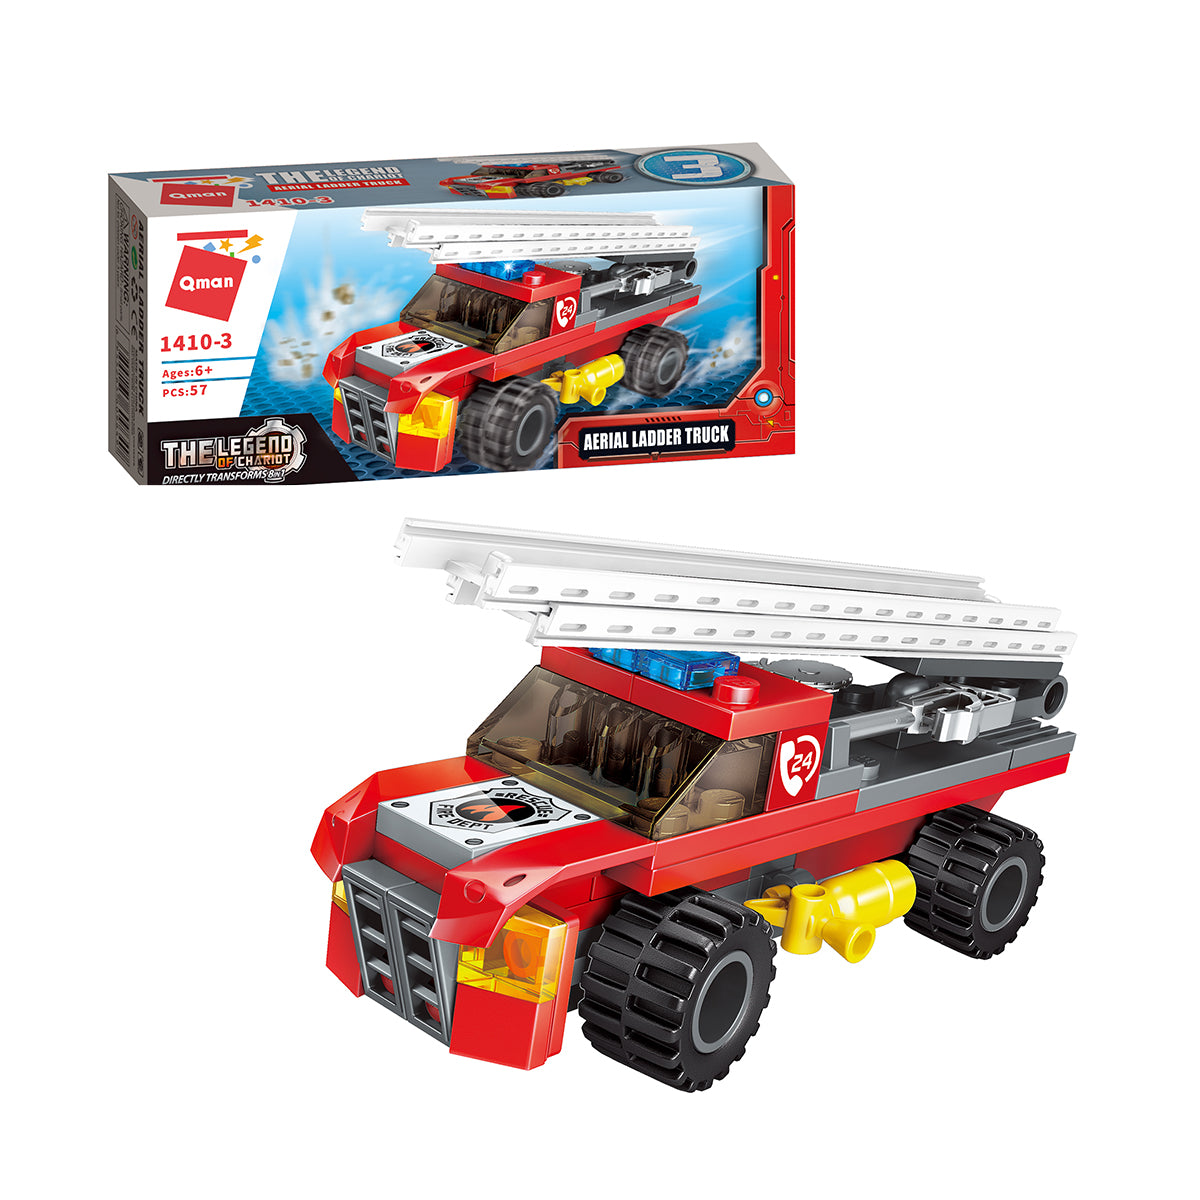 Qman The Legend of Chariot: Aerial Ladder Truck (7681411285216)